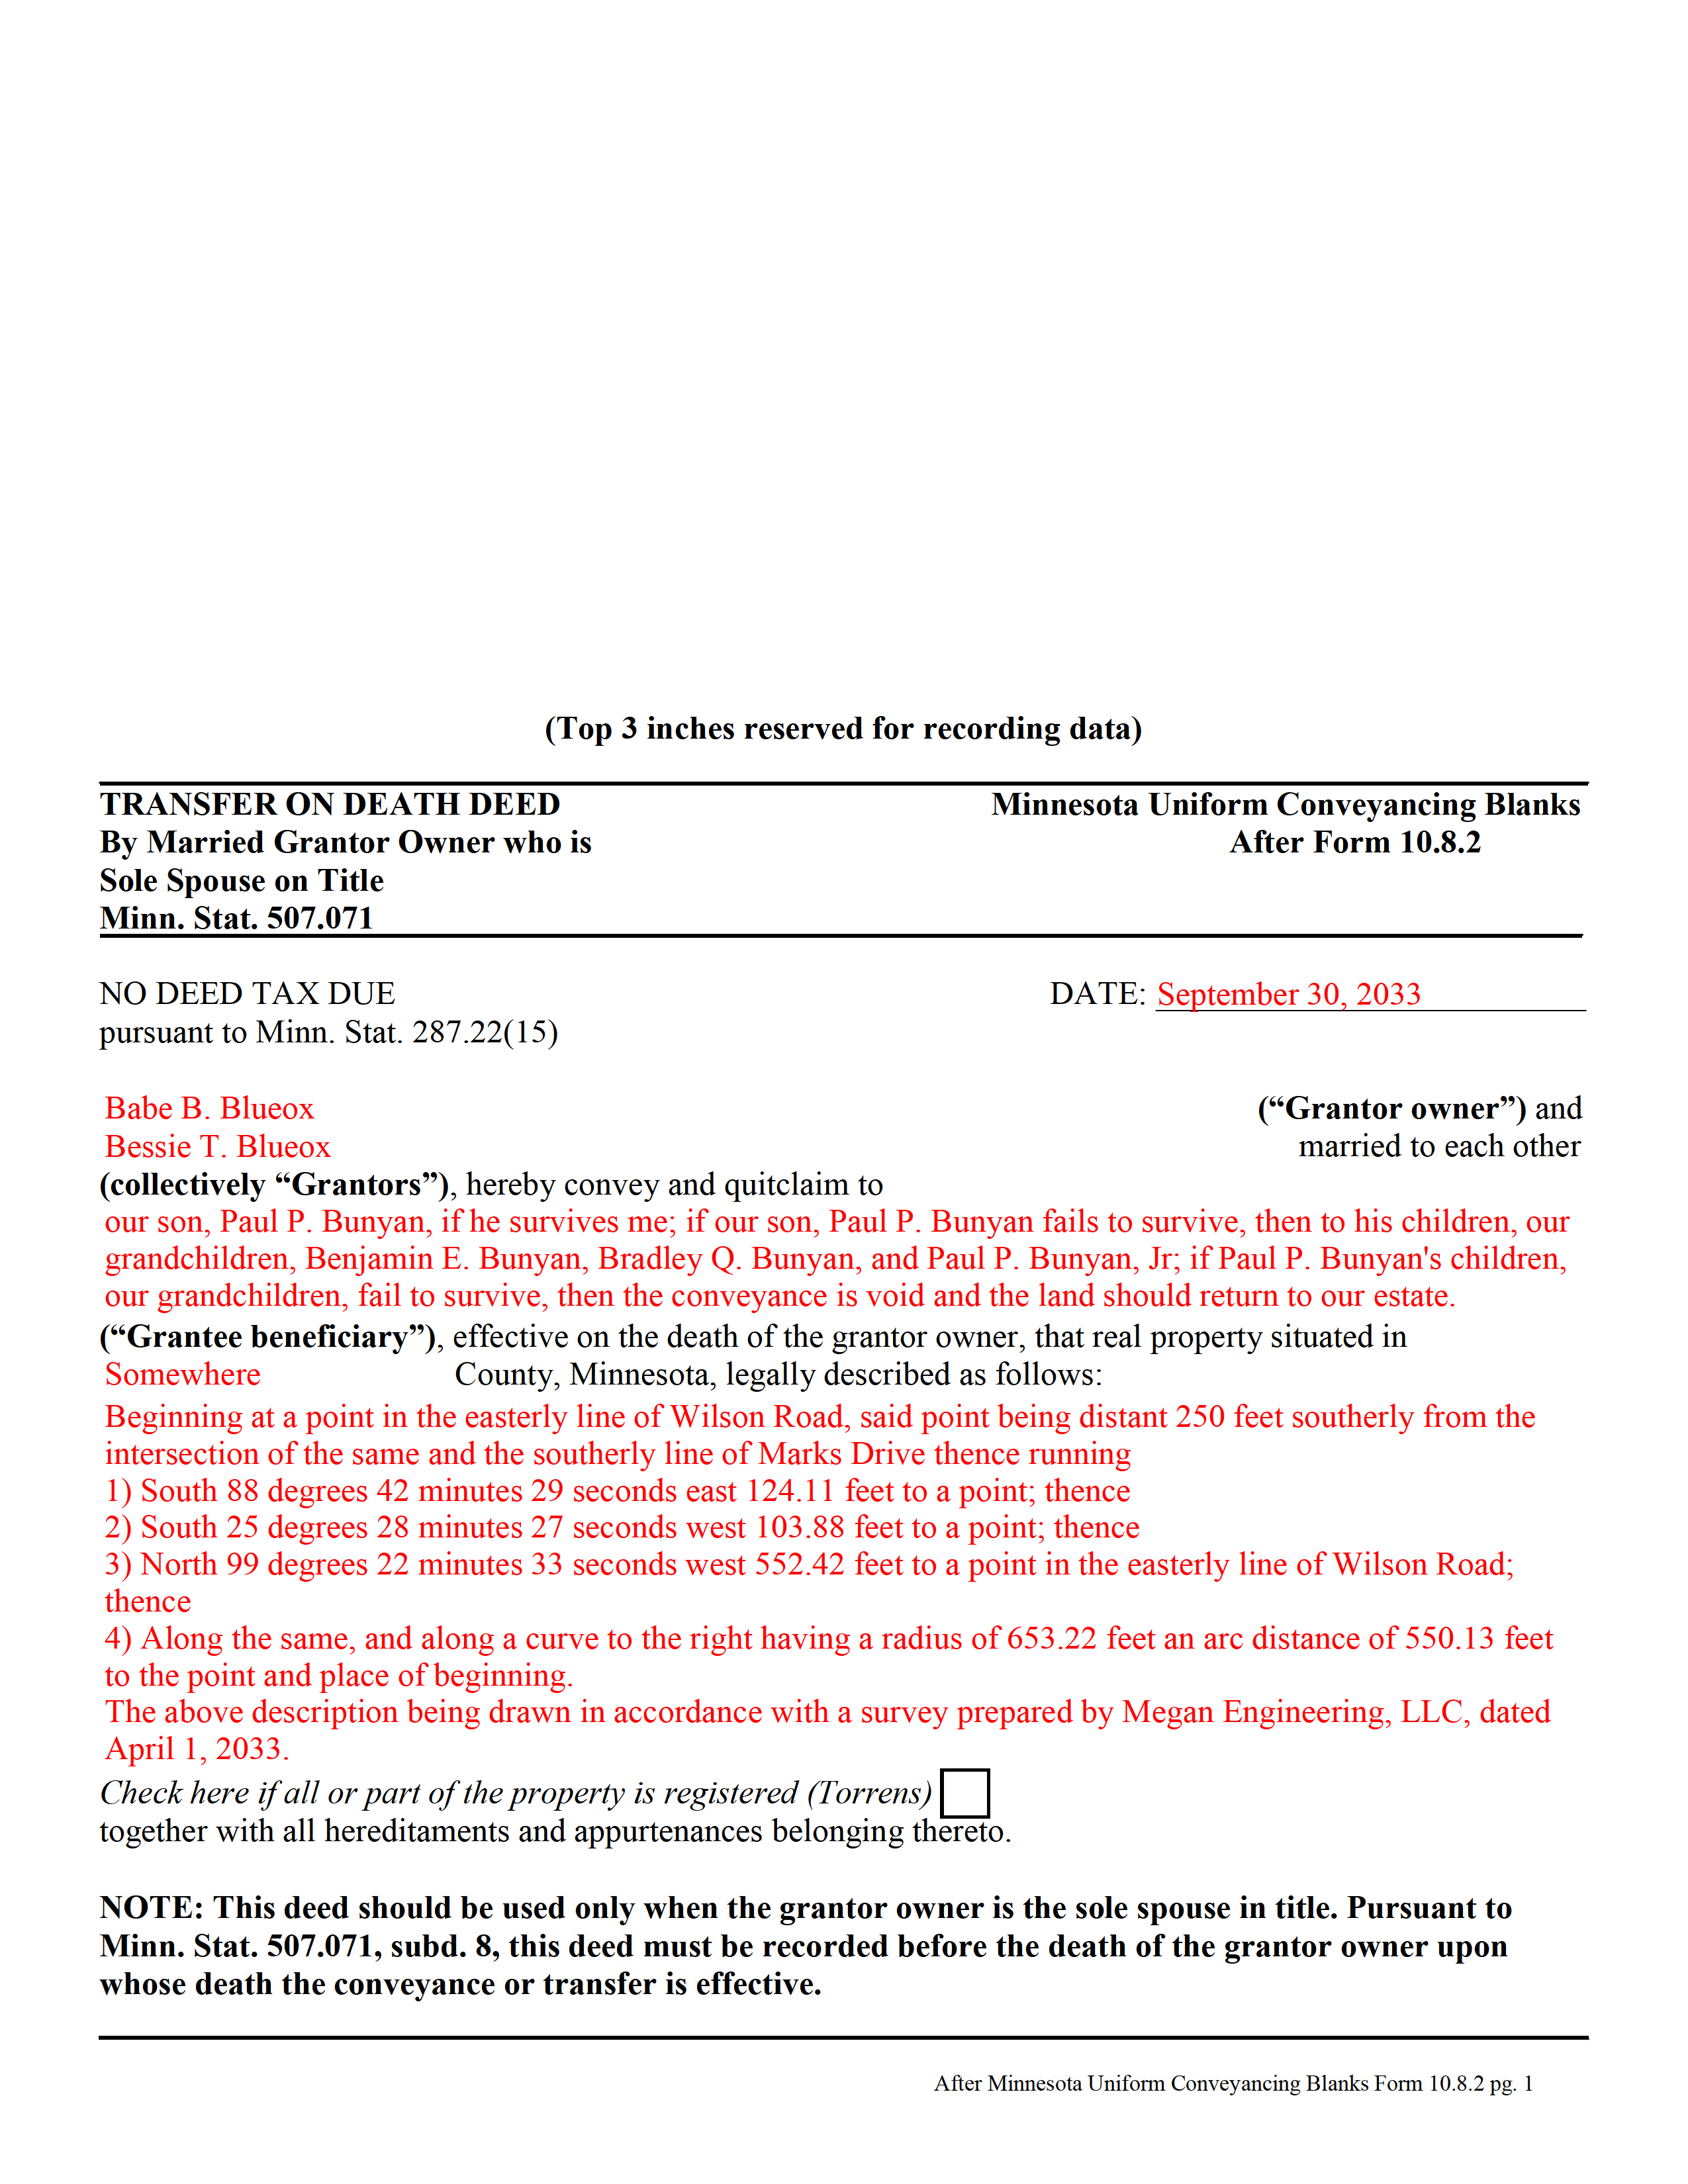 Completed Example of the Transfer on Death Deed by Married Sole Owner Document